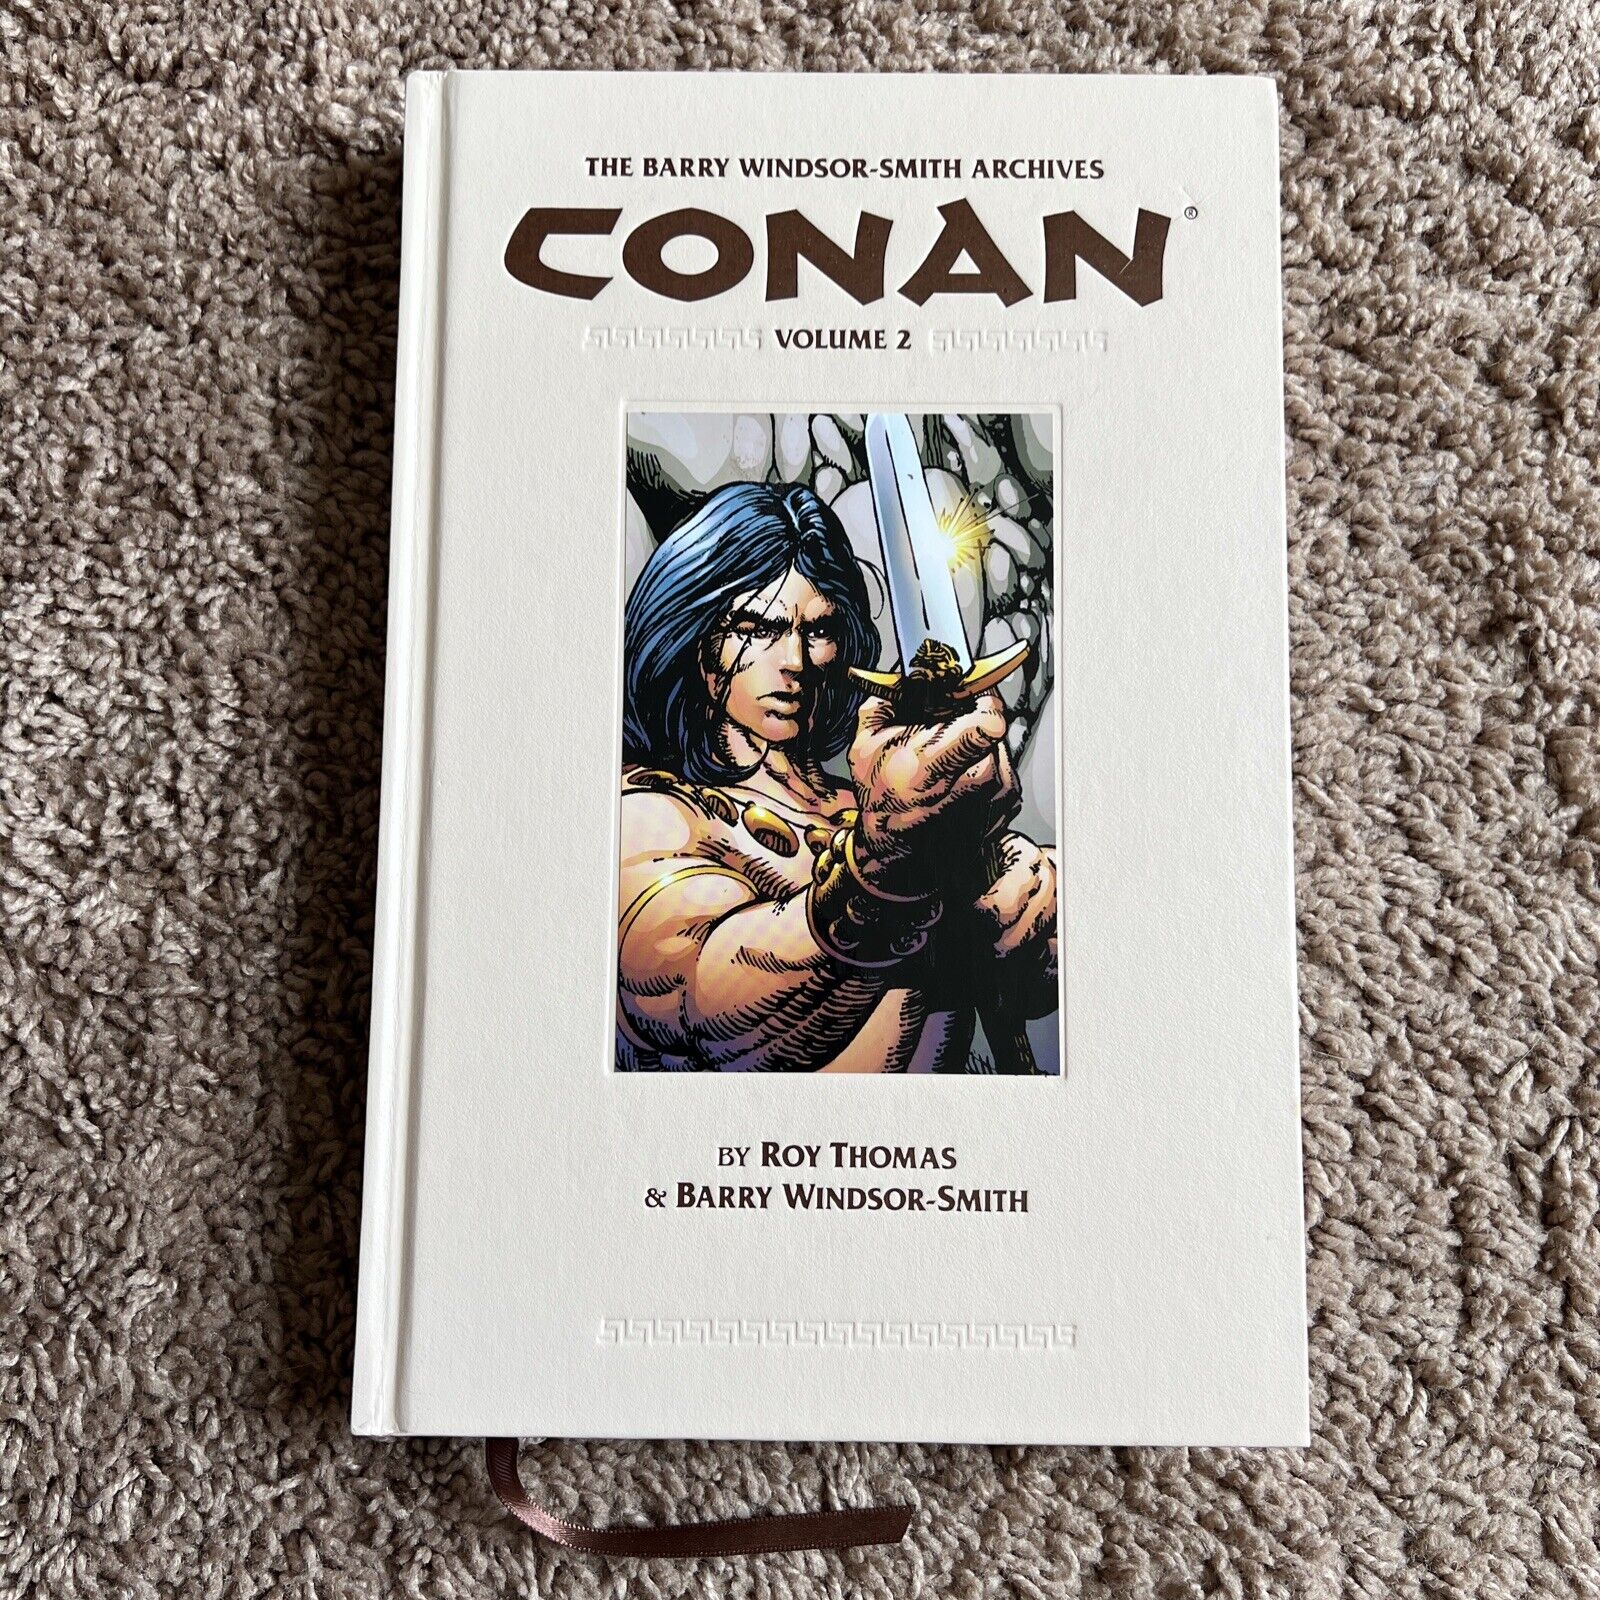 The Barry Windsor-Smith Archives Conan Volume 2 By Roy Thomas (Hardcover Book)